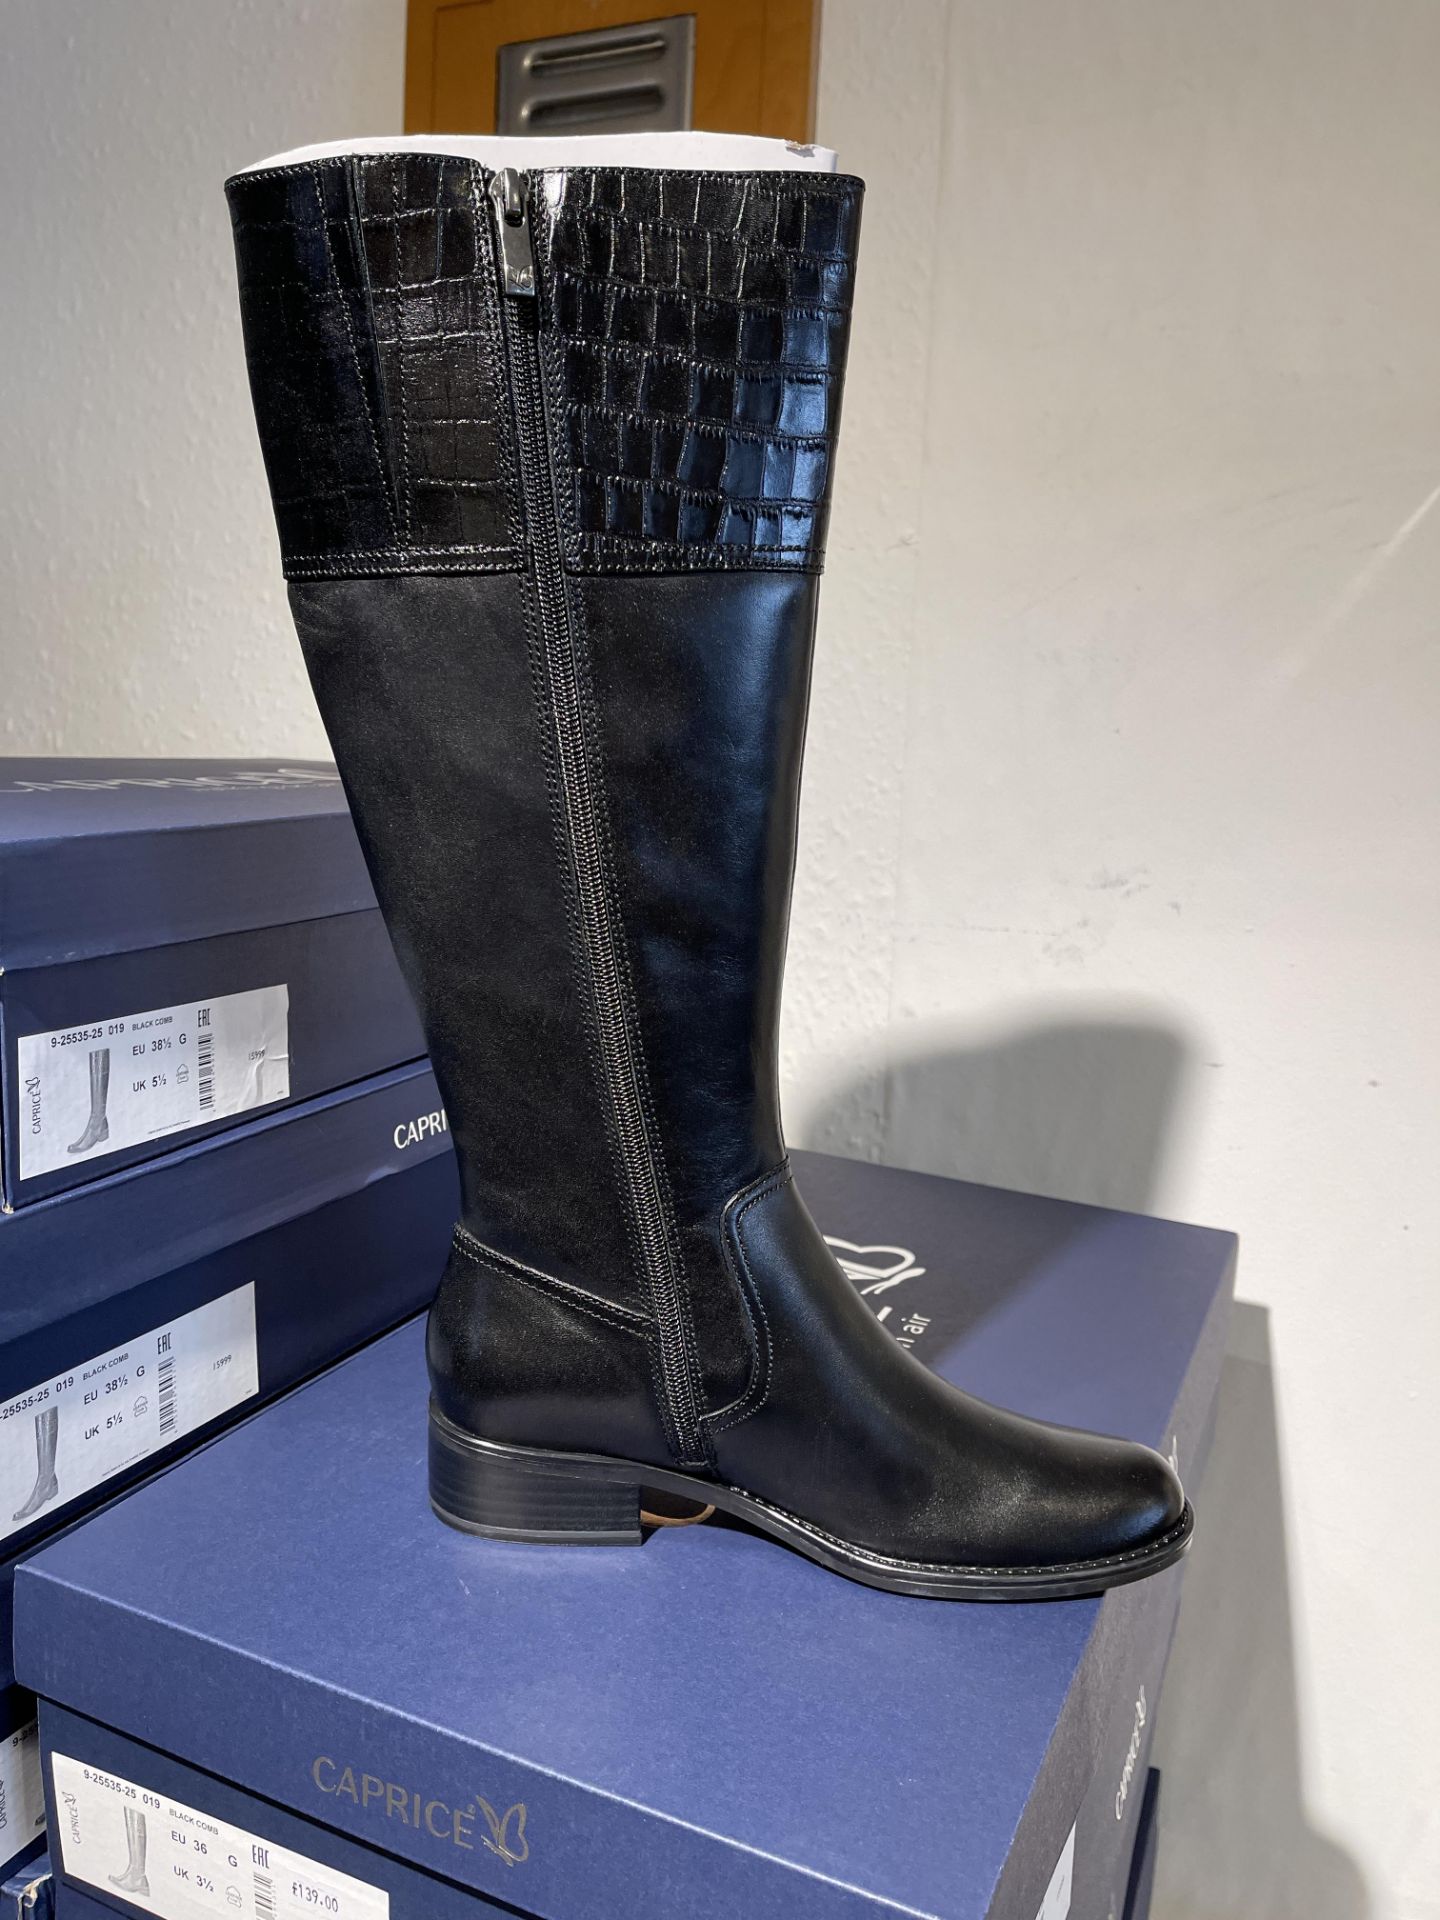 Caprice 10 Pairs: Black Comb Boots 9-25535-25 019. Sizes 3.5 - 7 (RRP £120) - Image 5 of 10